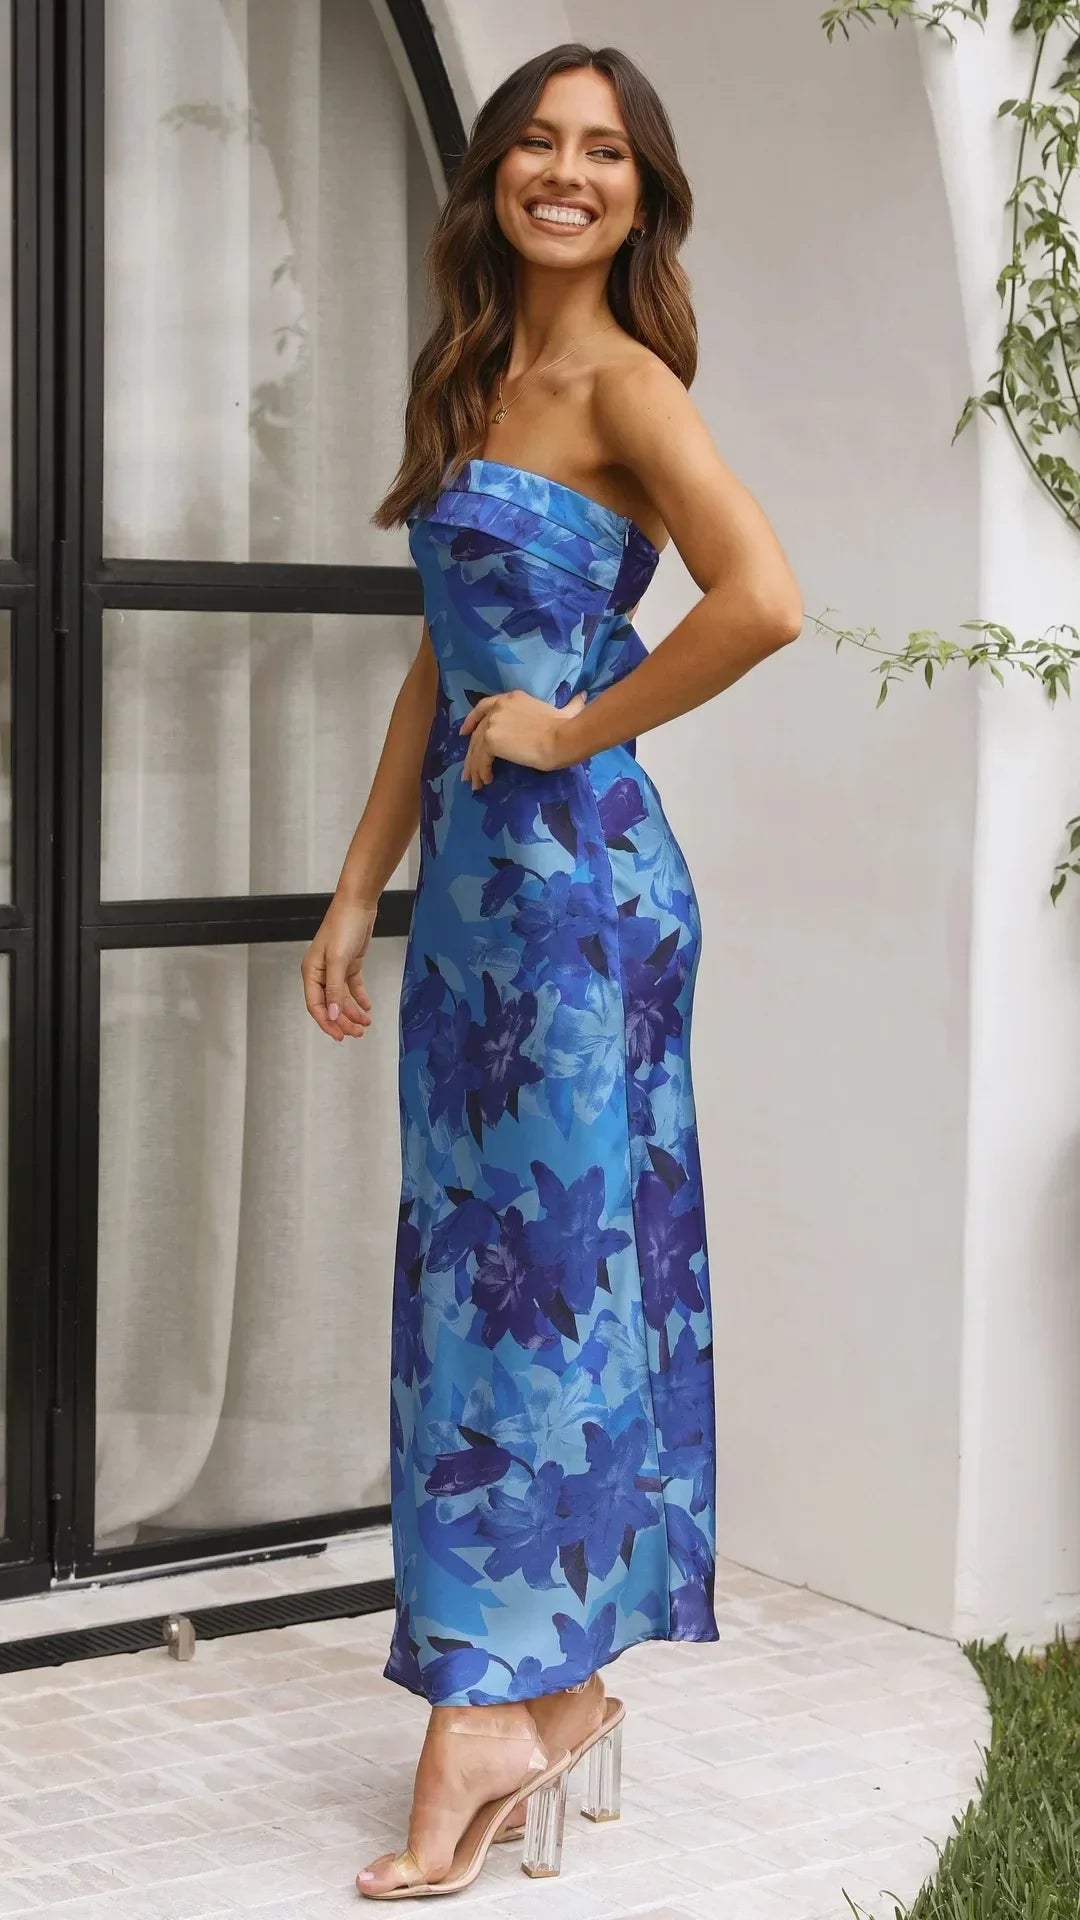 Cocktail Dresses- Floral Strapless Midi Dress for Weddings and Beach Parties- - Pekosa Women Fashion